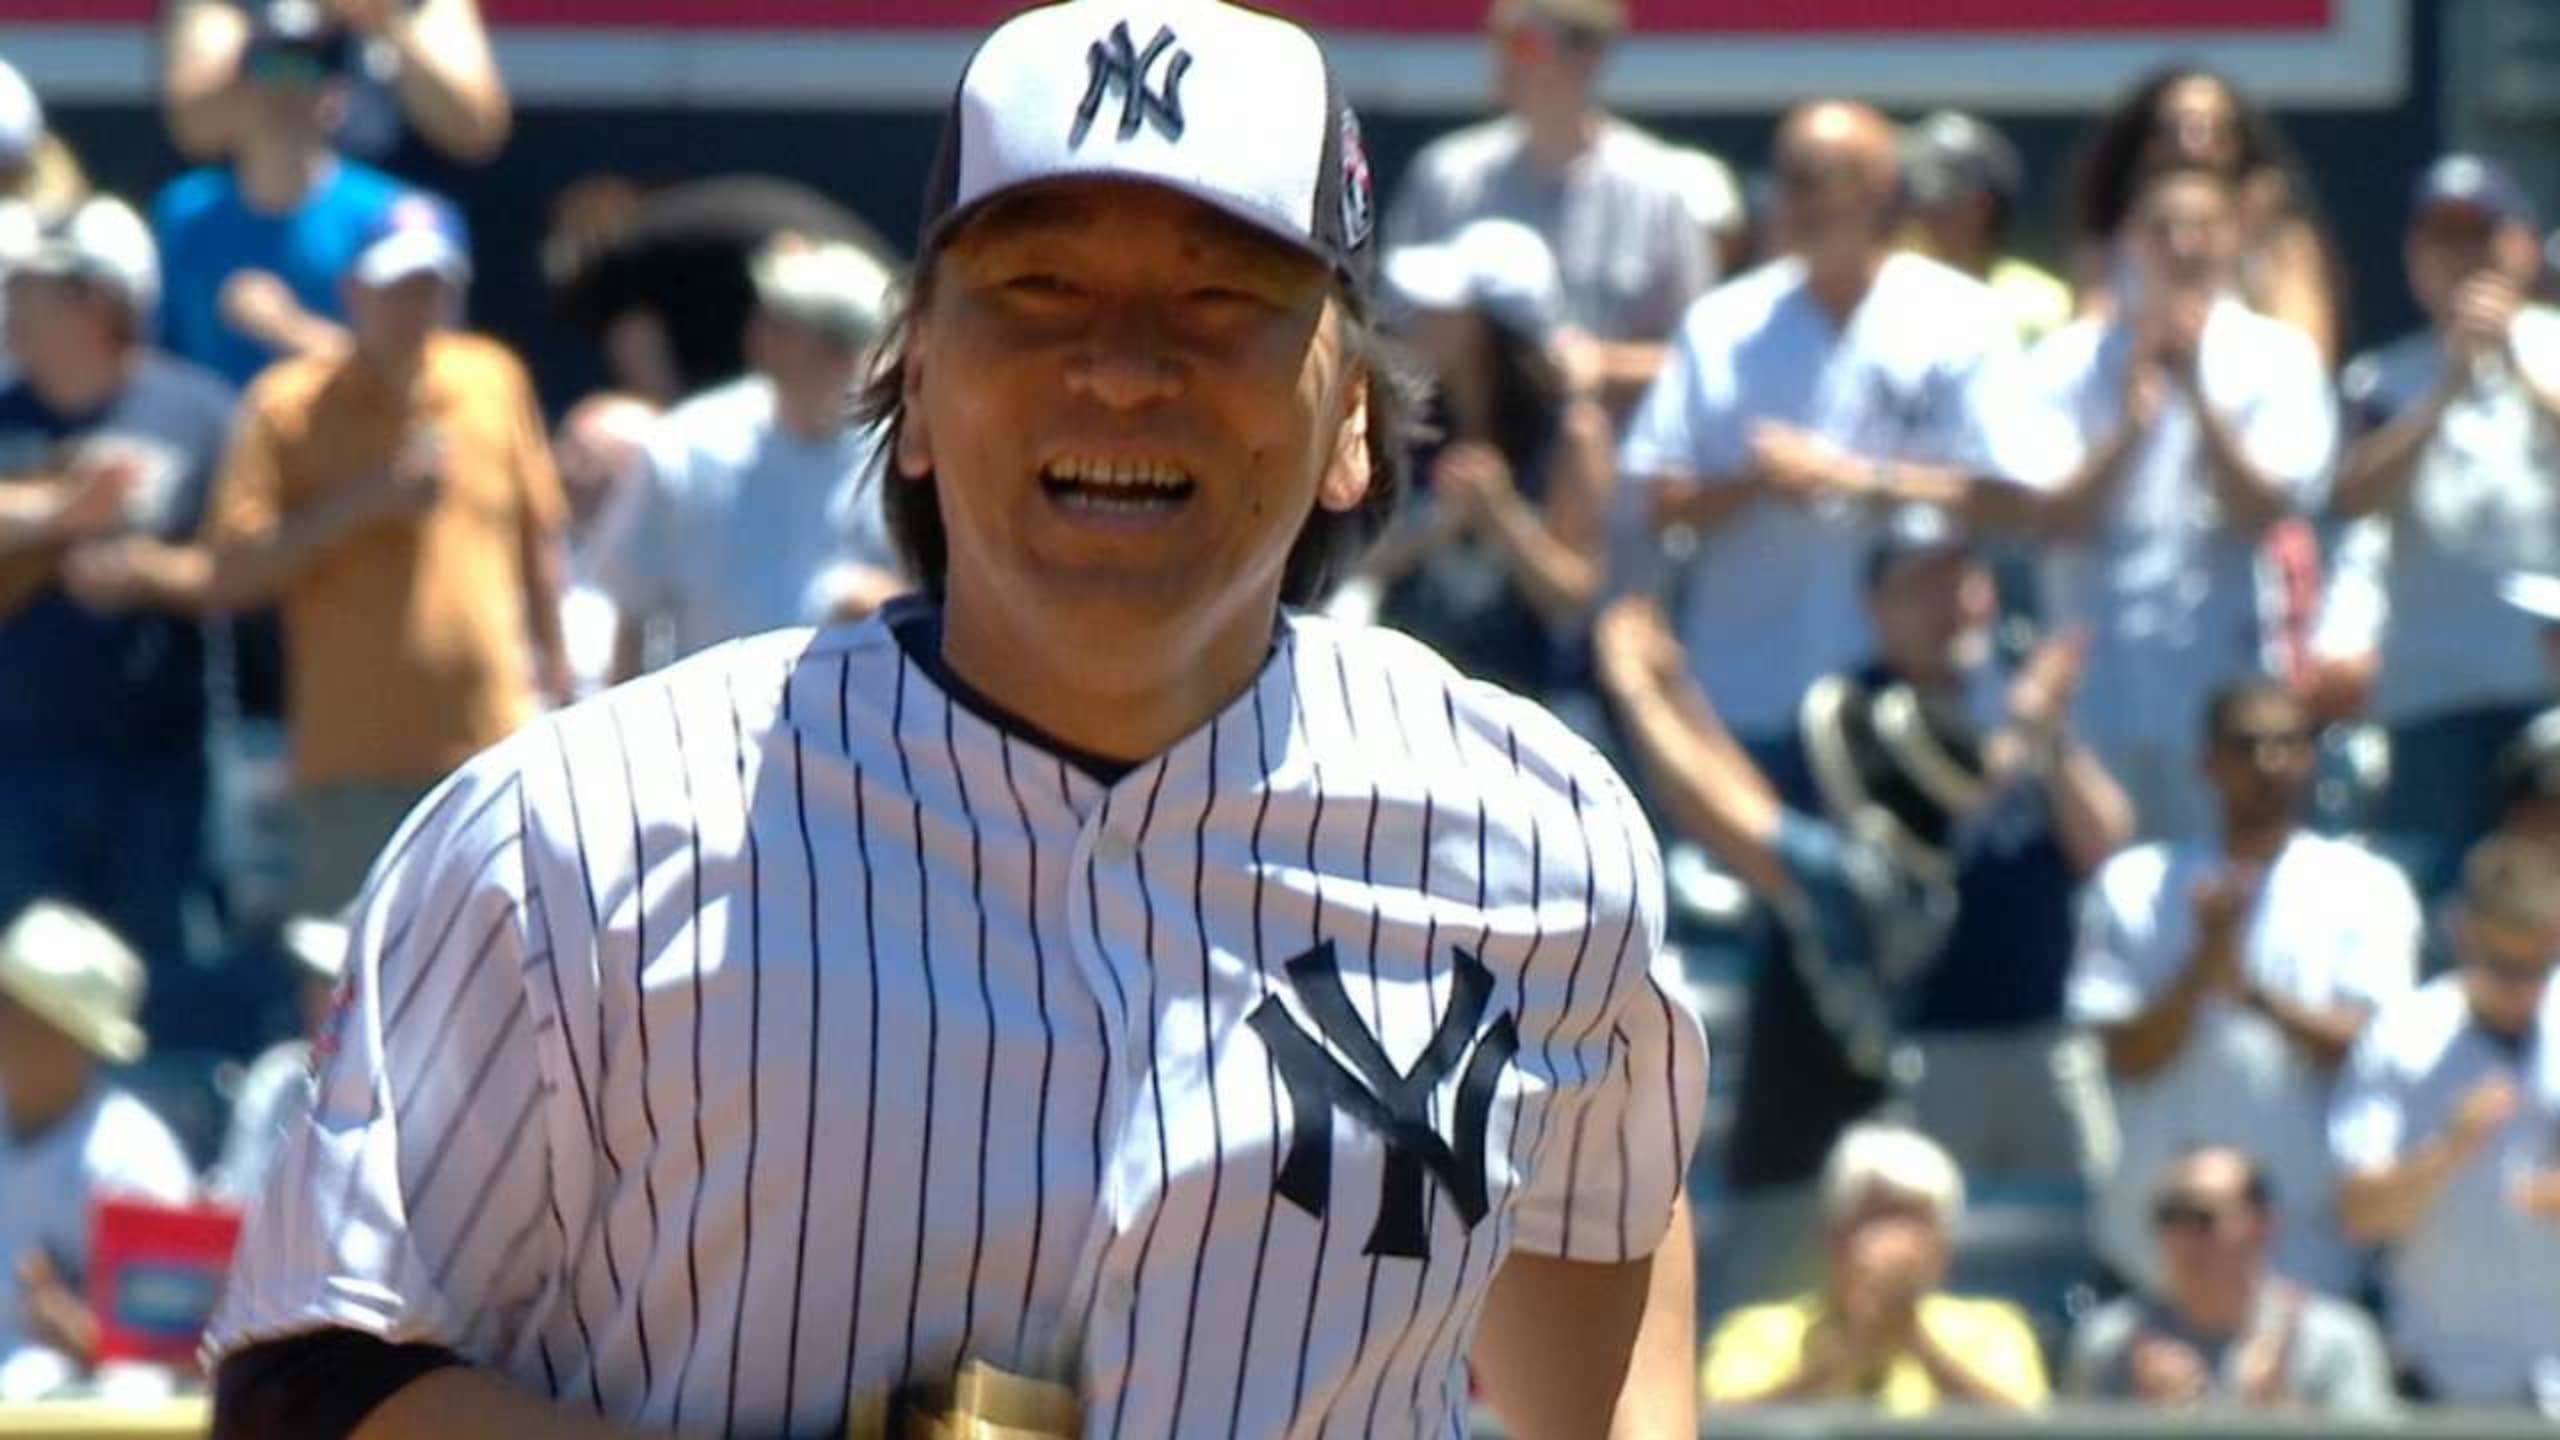 yankees old timers day